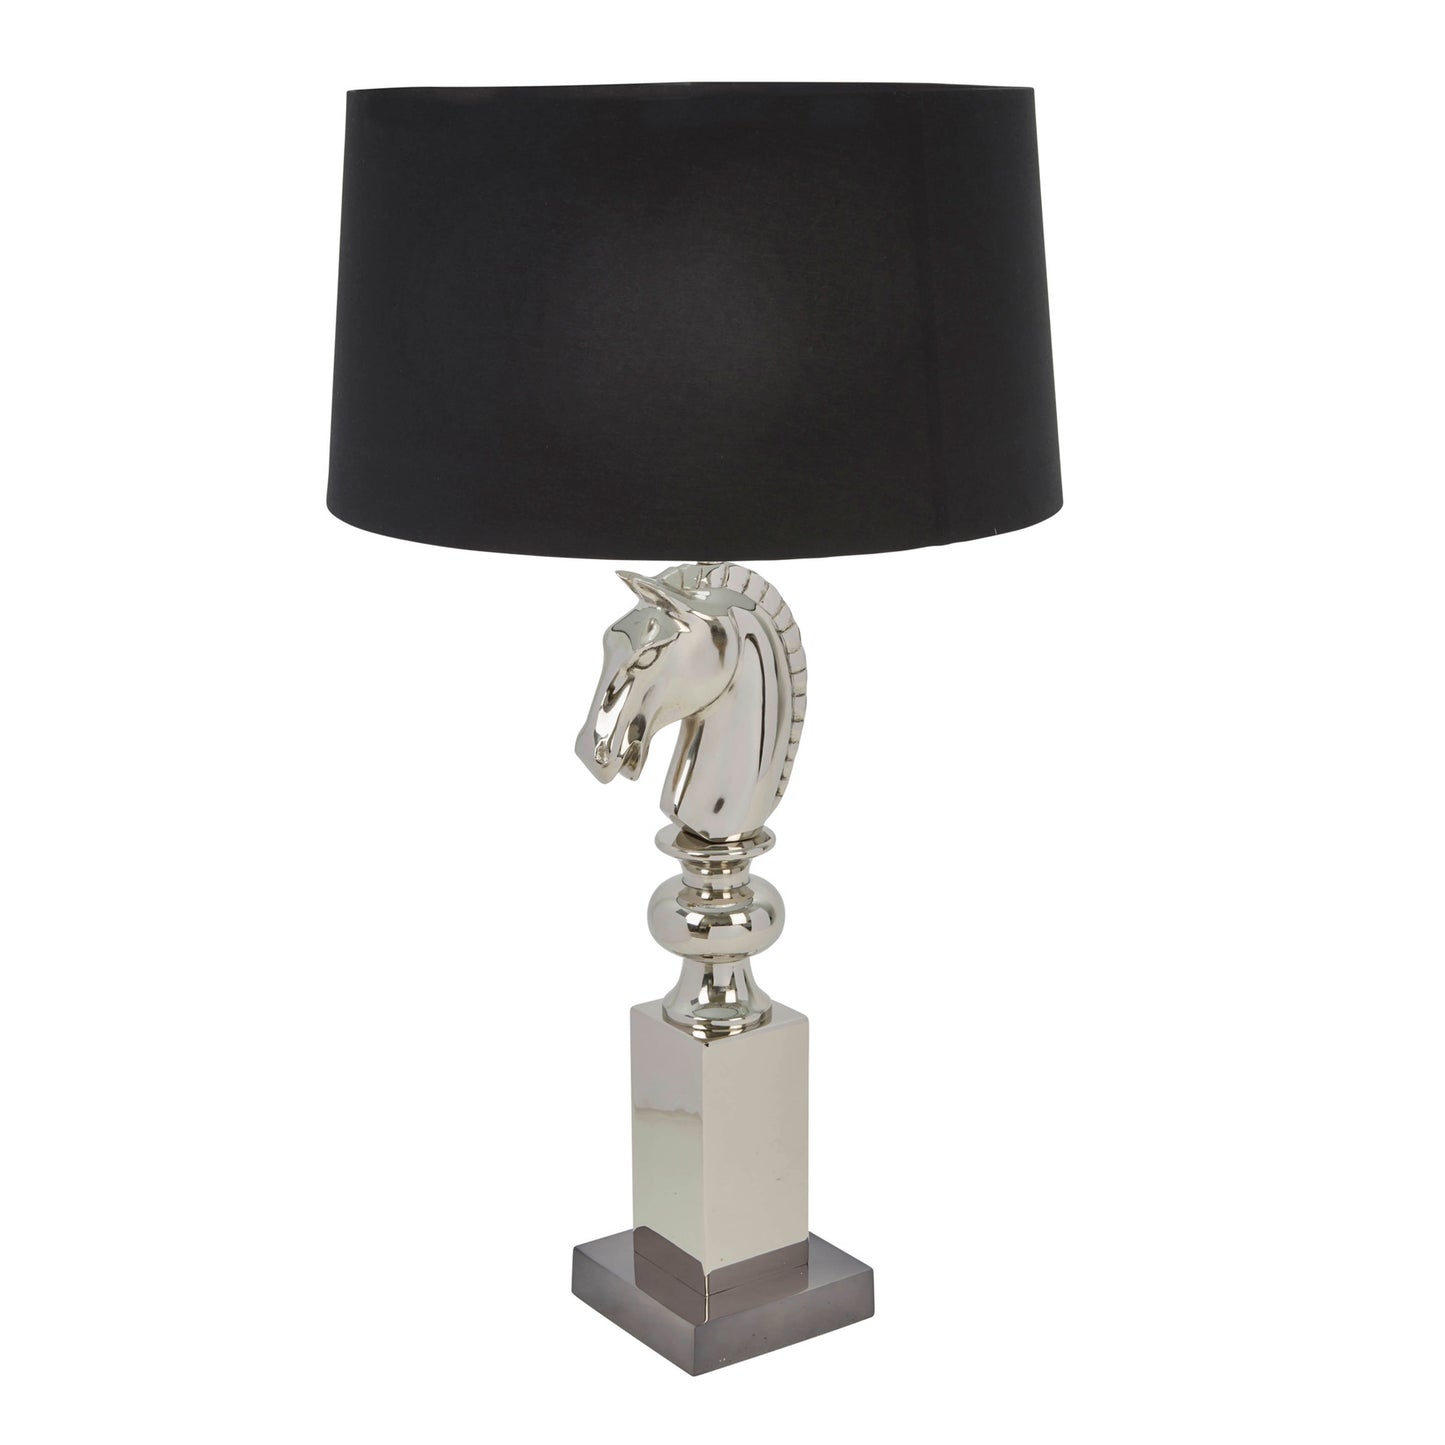 31" Stainless Steel Horse Head Table Lamp, Silver